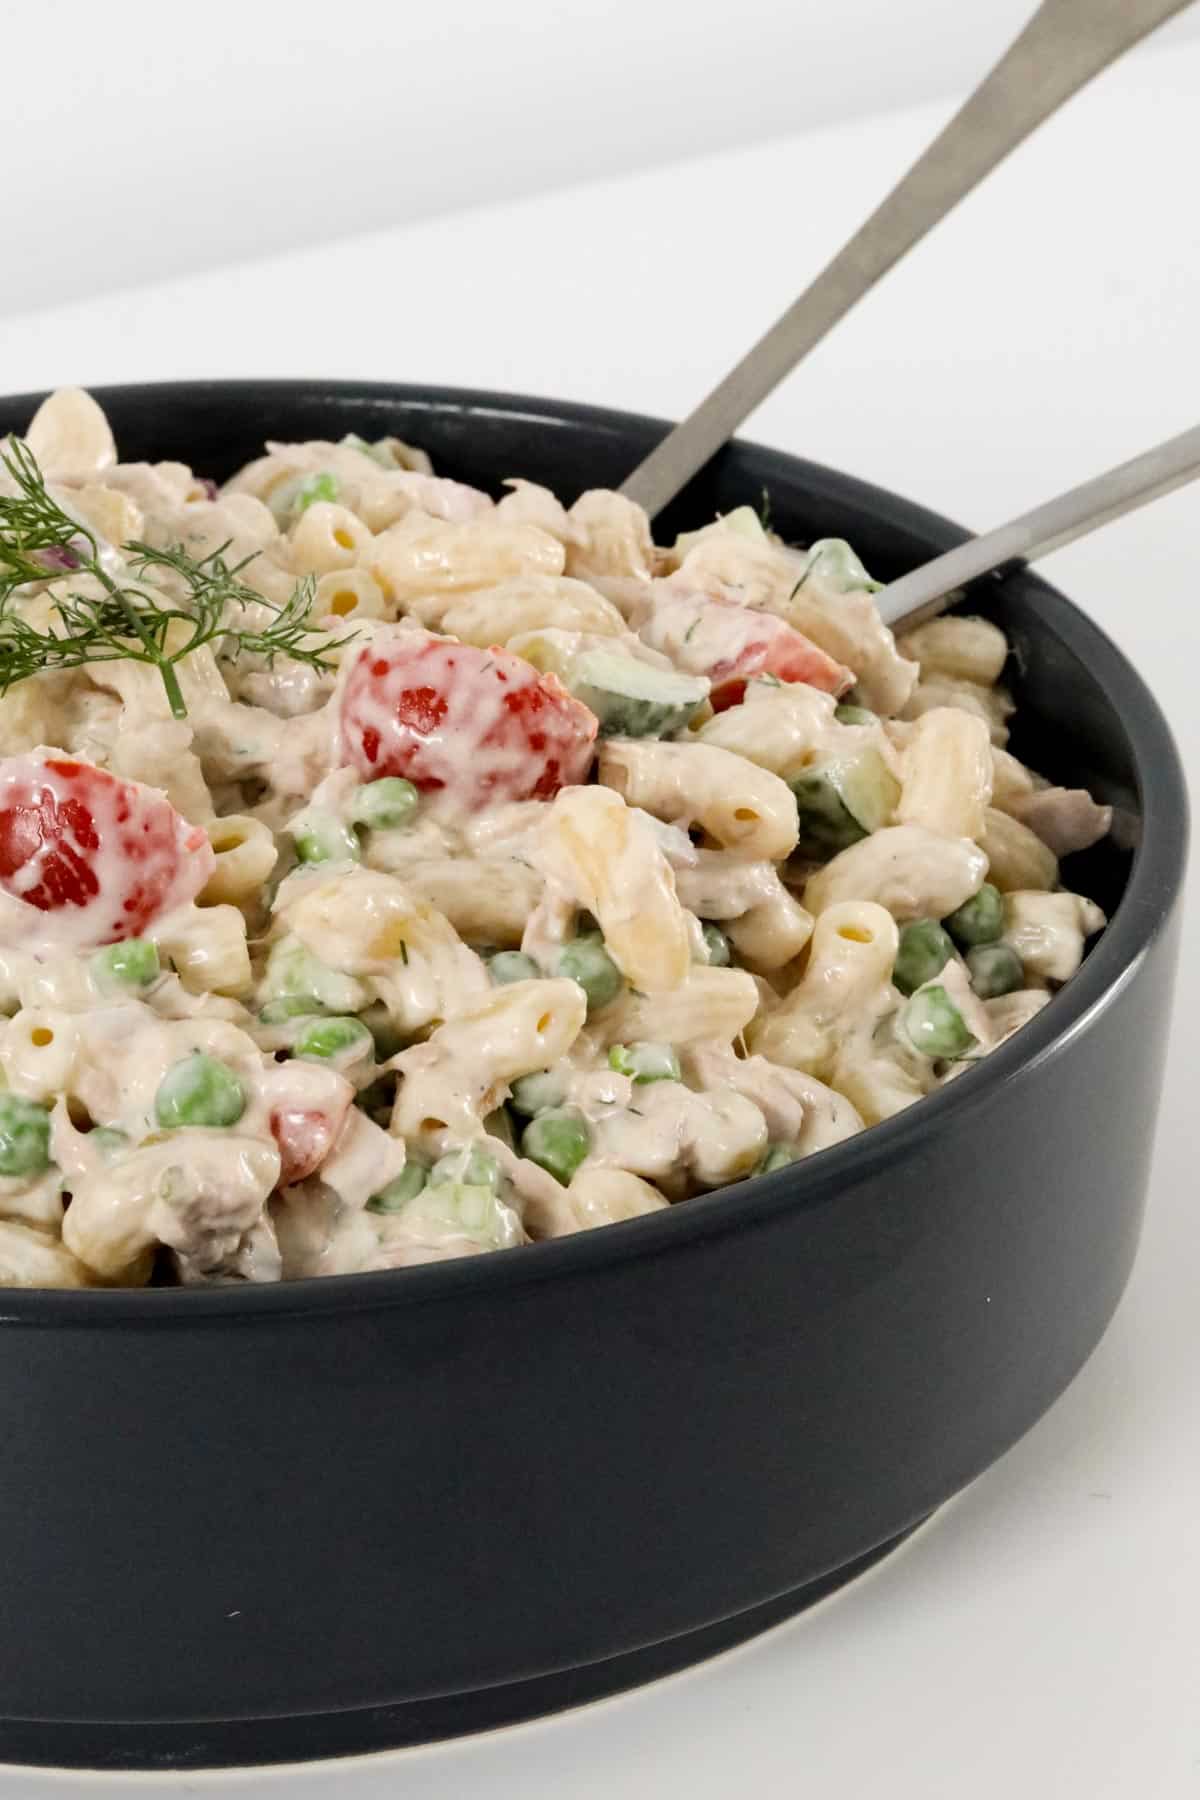 A black bowl filled with tuna pasta salad